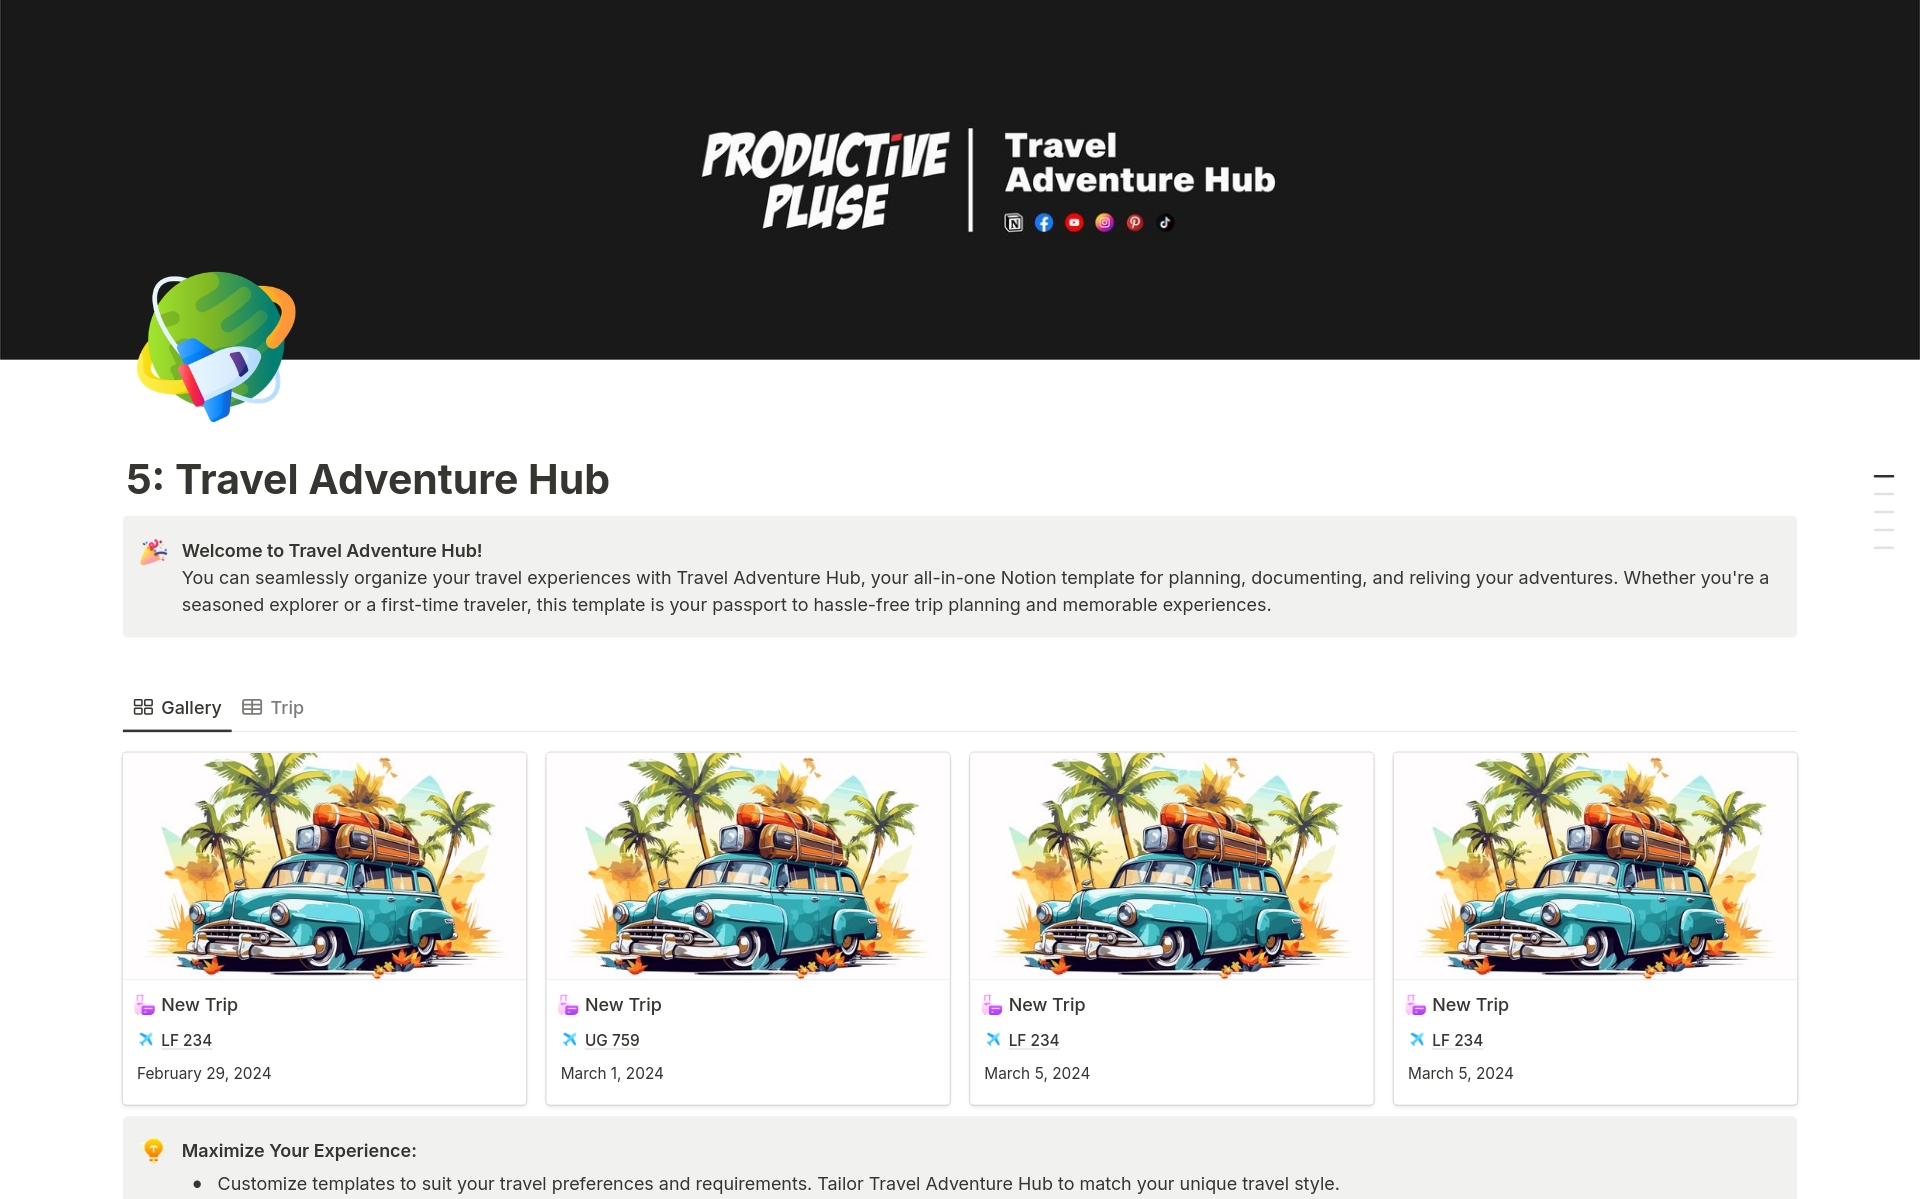 You can seamlessly organize your travel experiences with Travel Adventure Hub, your all-in-one Notion template for planning, documenting, and reliving your adventures. 